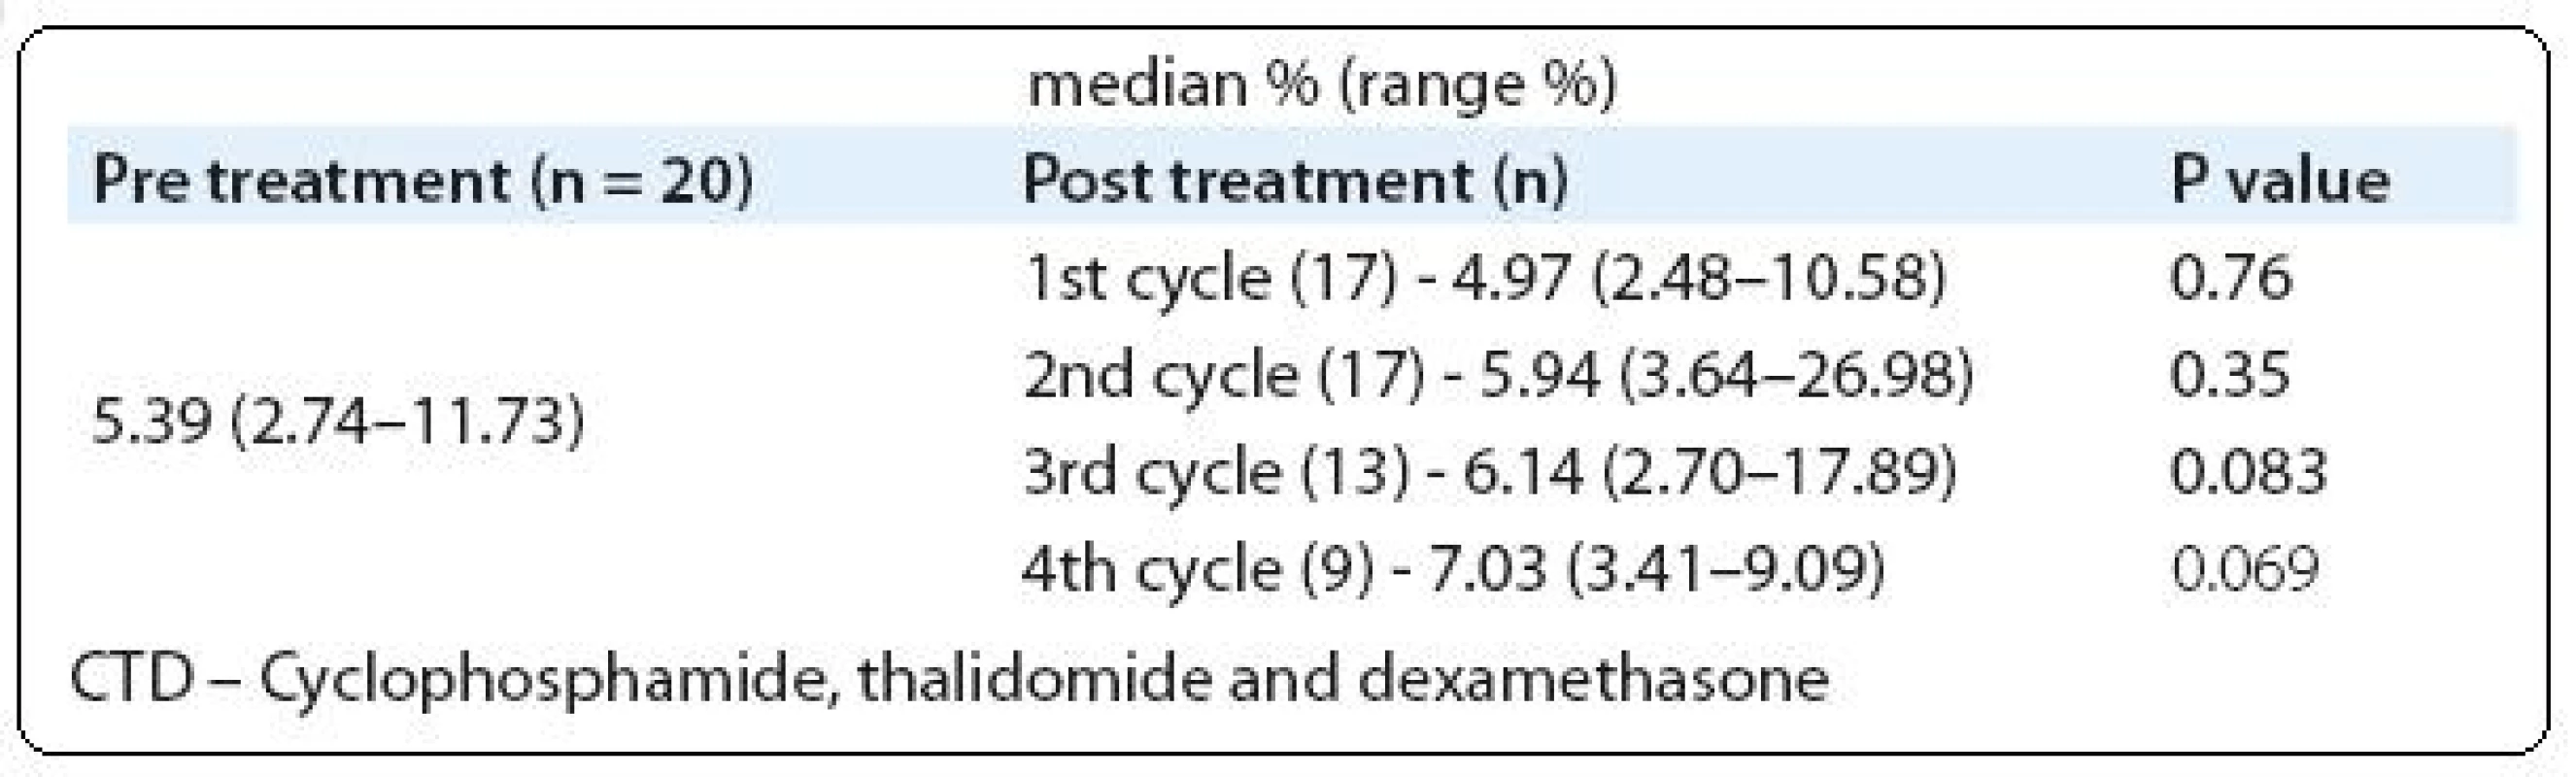 Assessment of Tregs frequencies between pre treatment versus post treatment cycles (CTD).